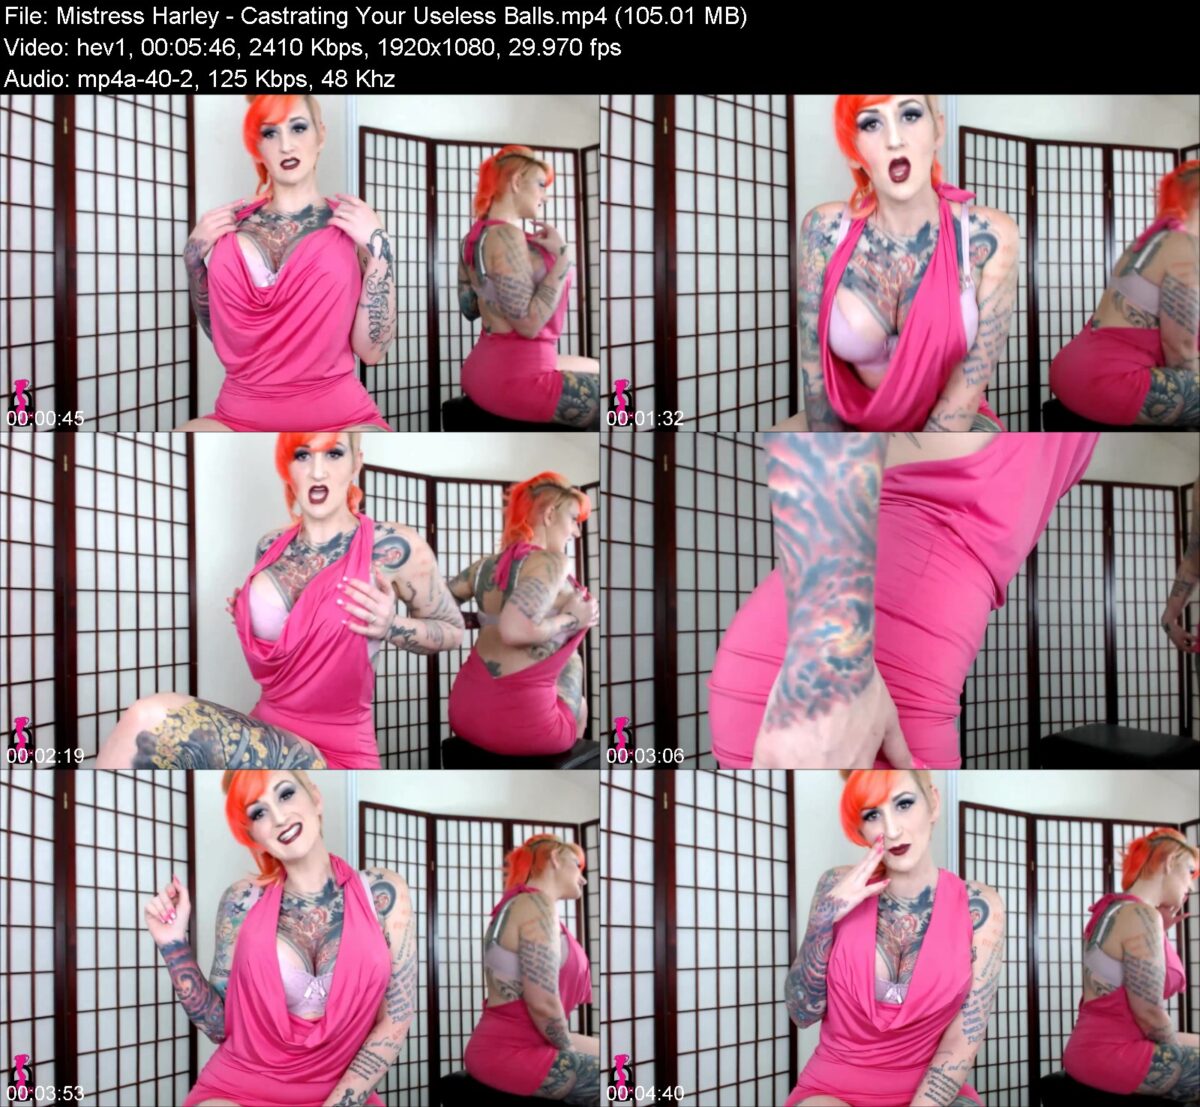 Actress: Mistress Harley. Title and Studio: Castrating Your Useless Balls